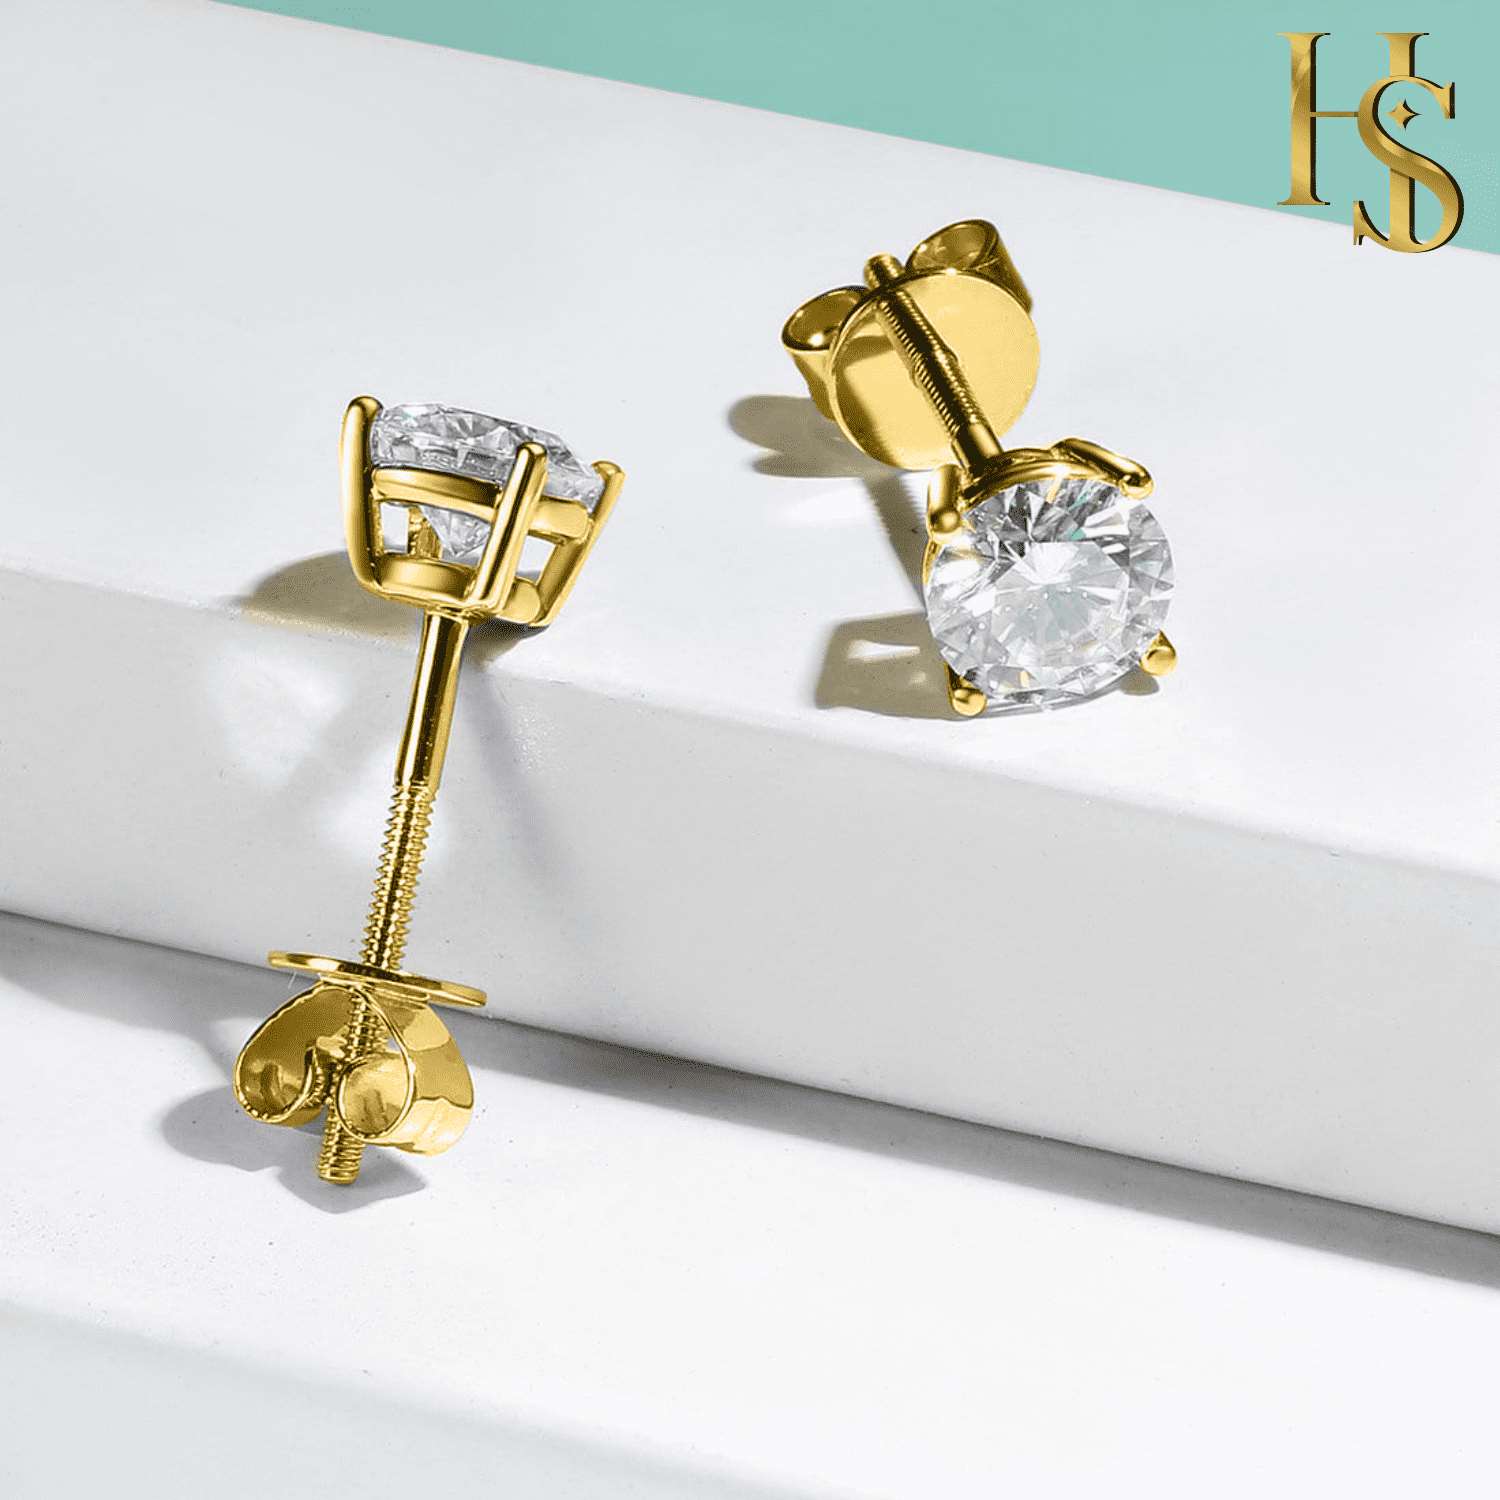 Gold Solitaire Earrings Screwback in 92.5 Silver embellished with Swarovski Zirconia - 92.5 Silver in 18K Gold Finish